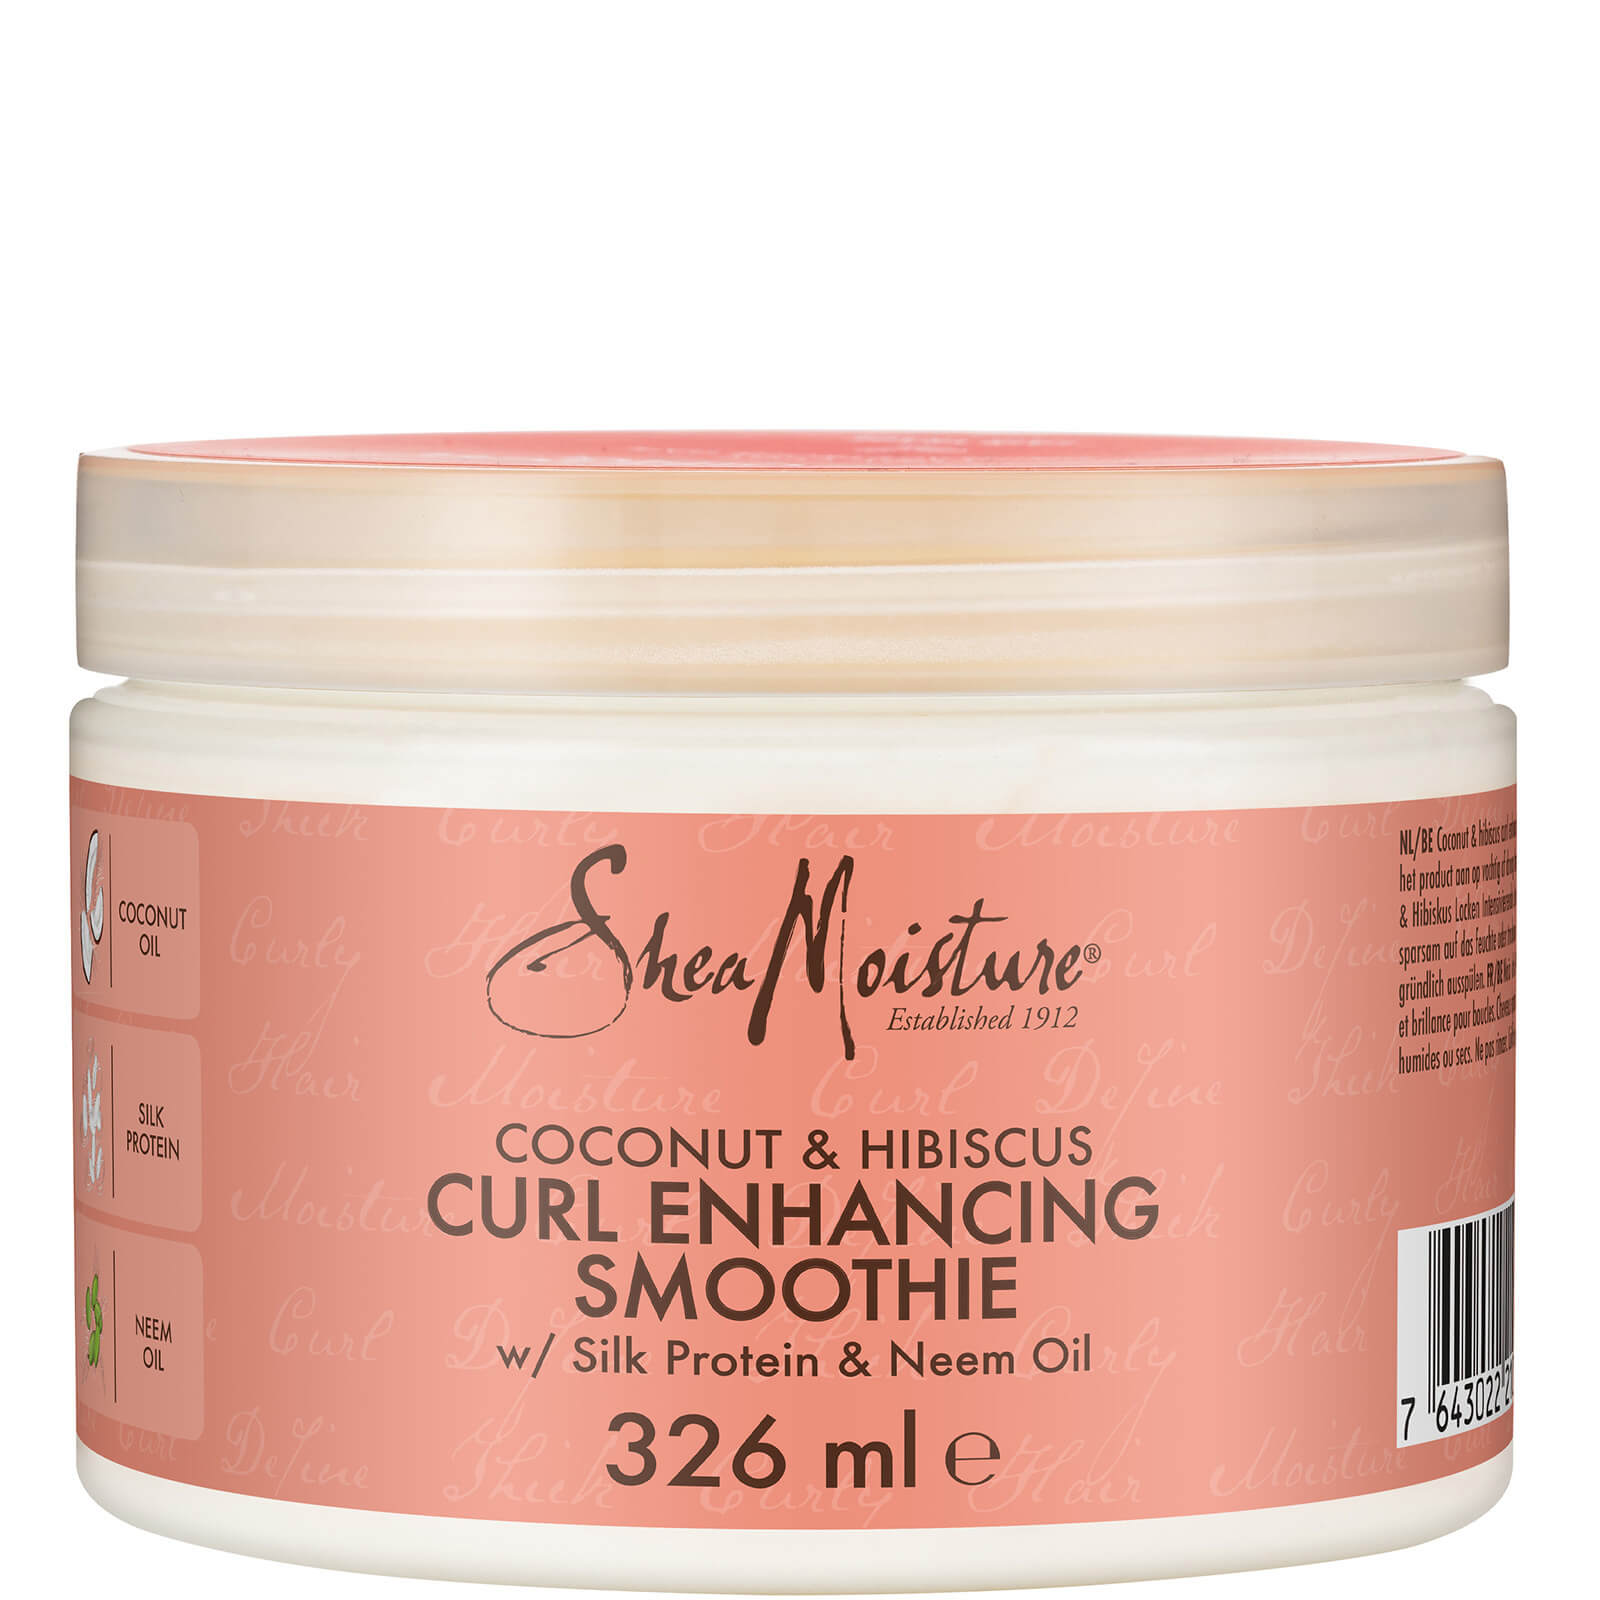 Image of Shea Moisture Coconut & Hibiscus Curl Enhancing Smoothie 326ml